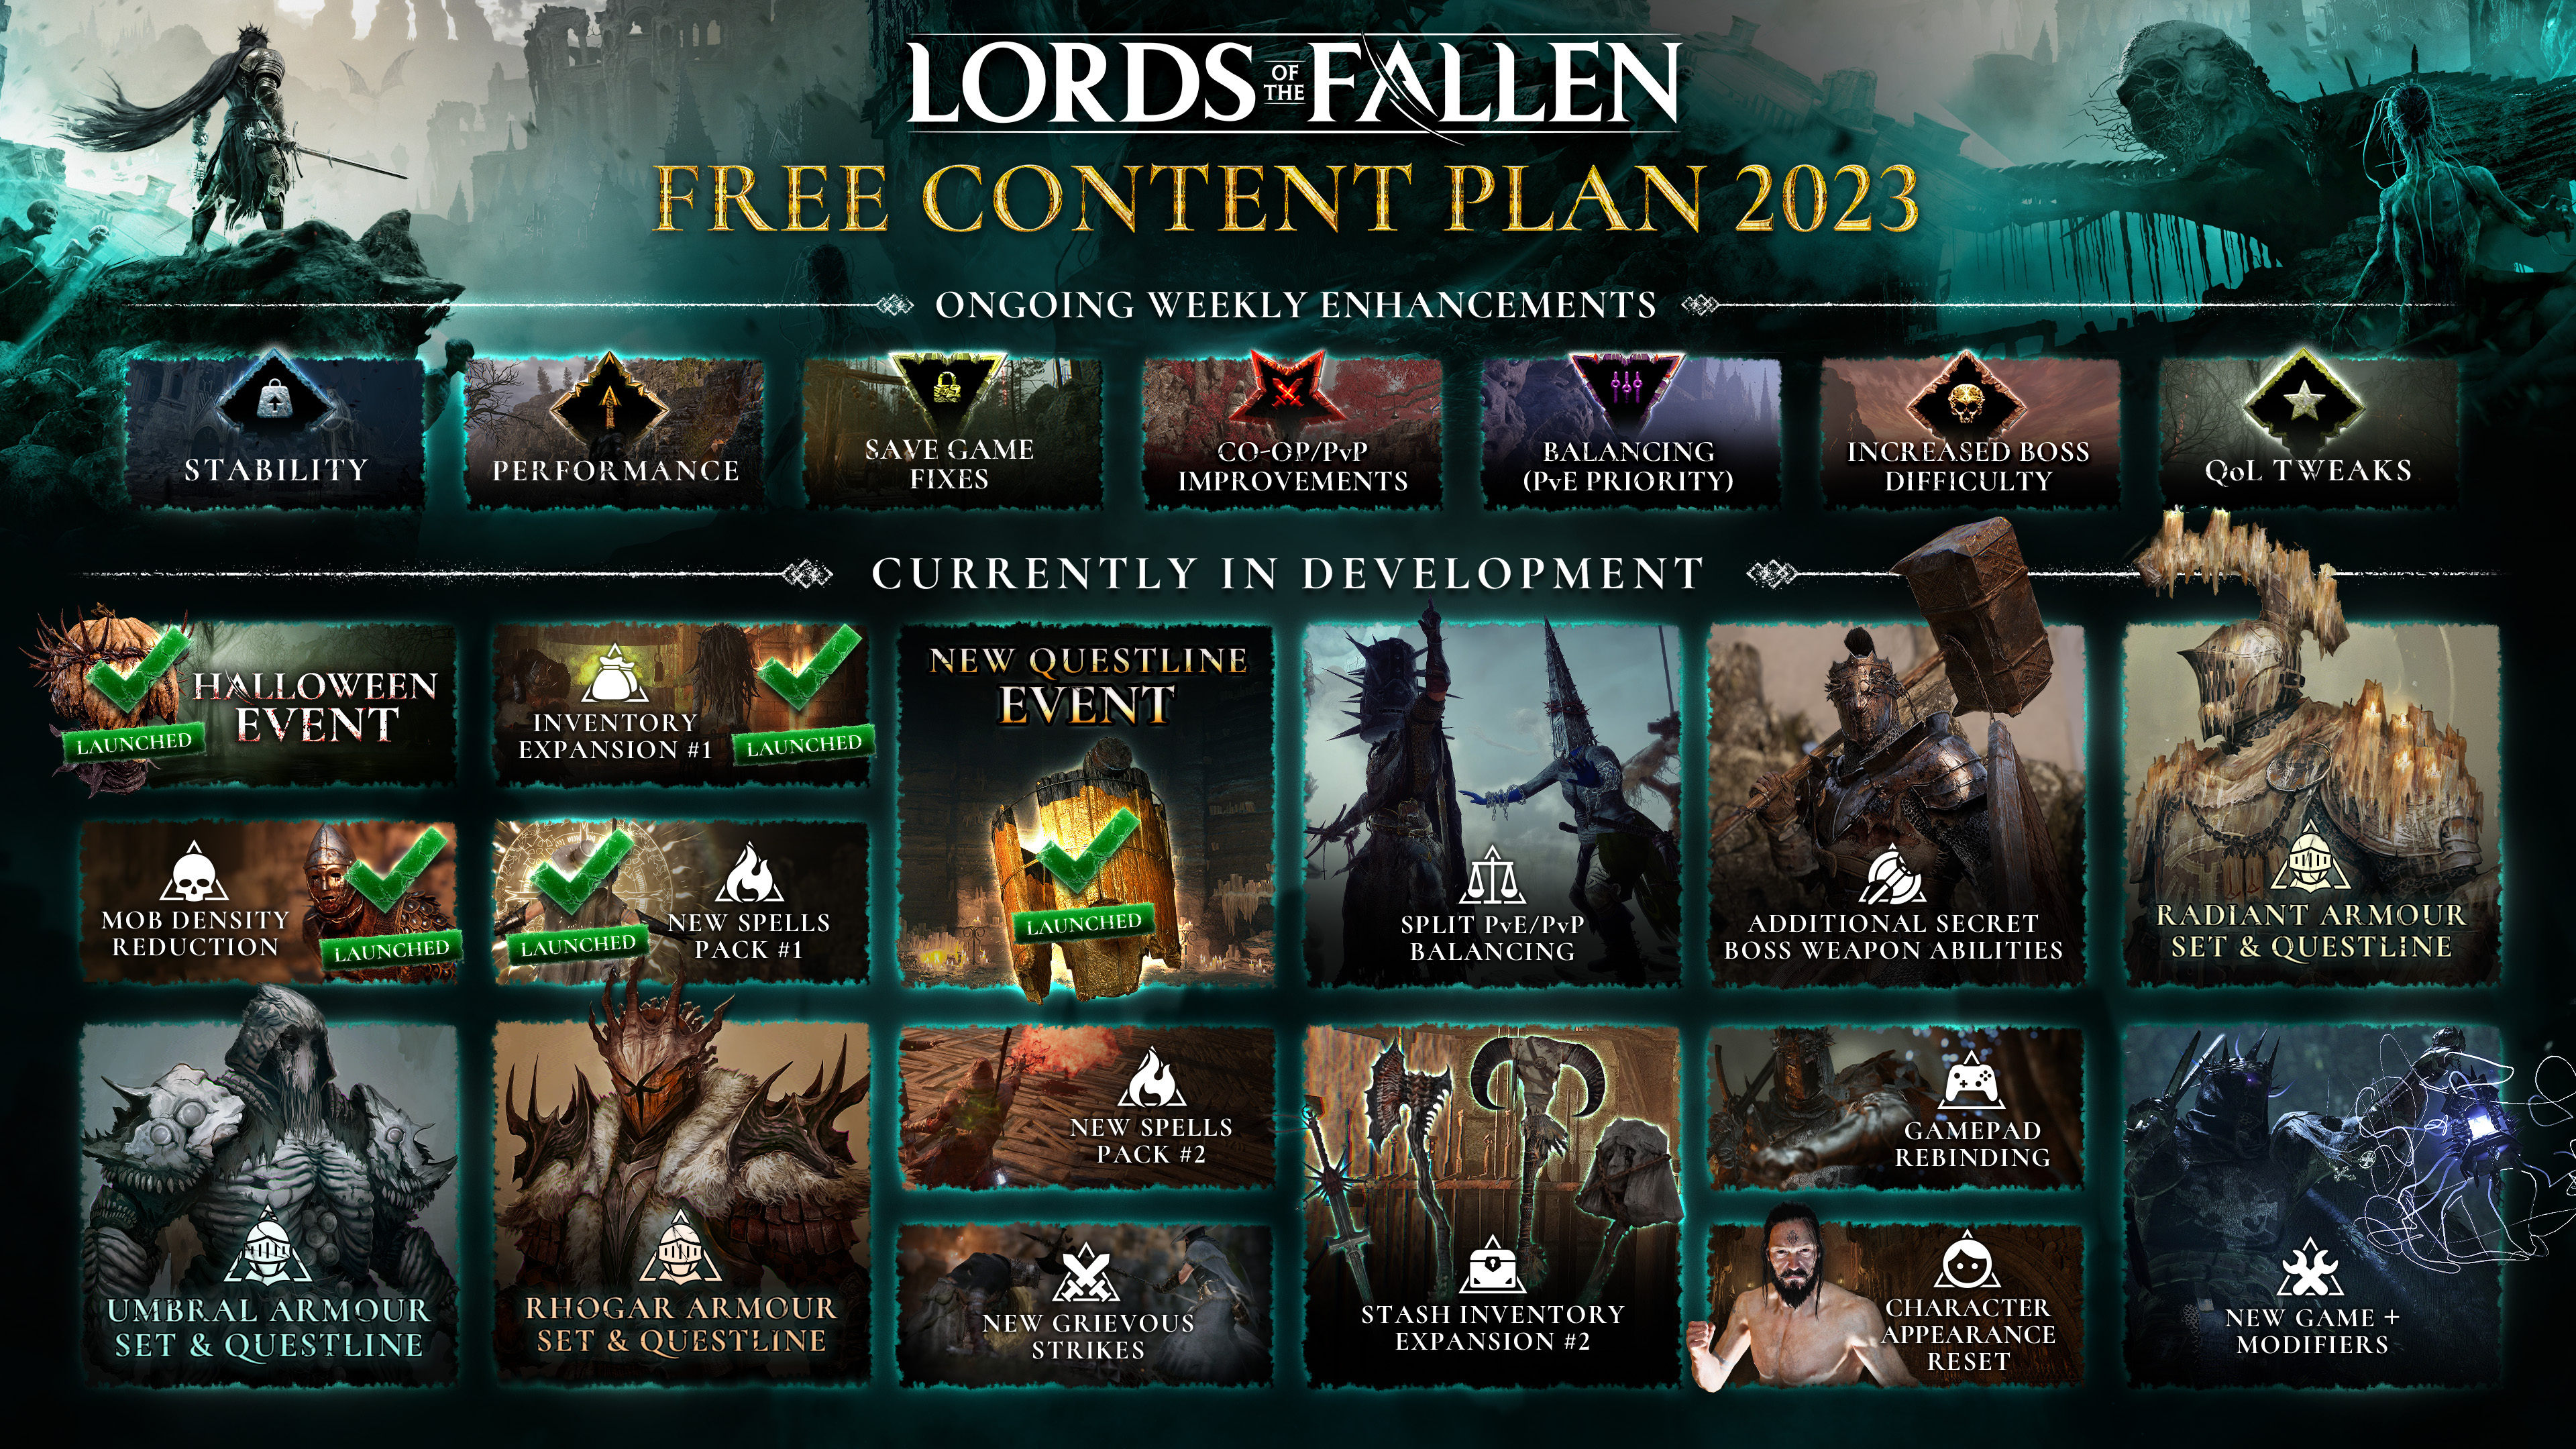 How long is Lords of the Fallen?